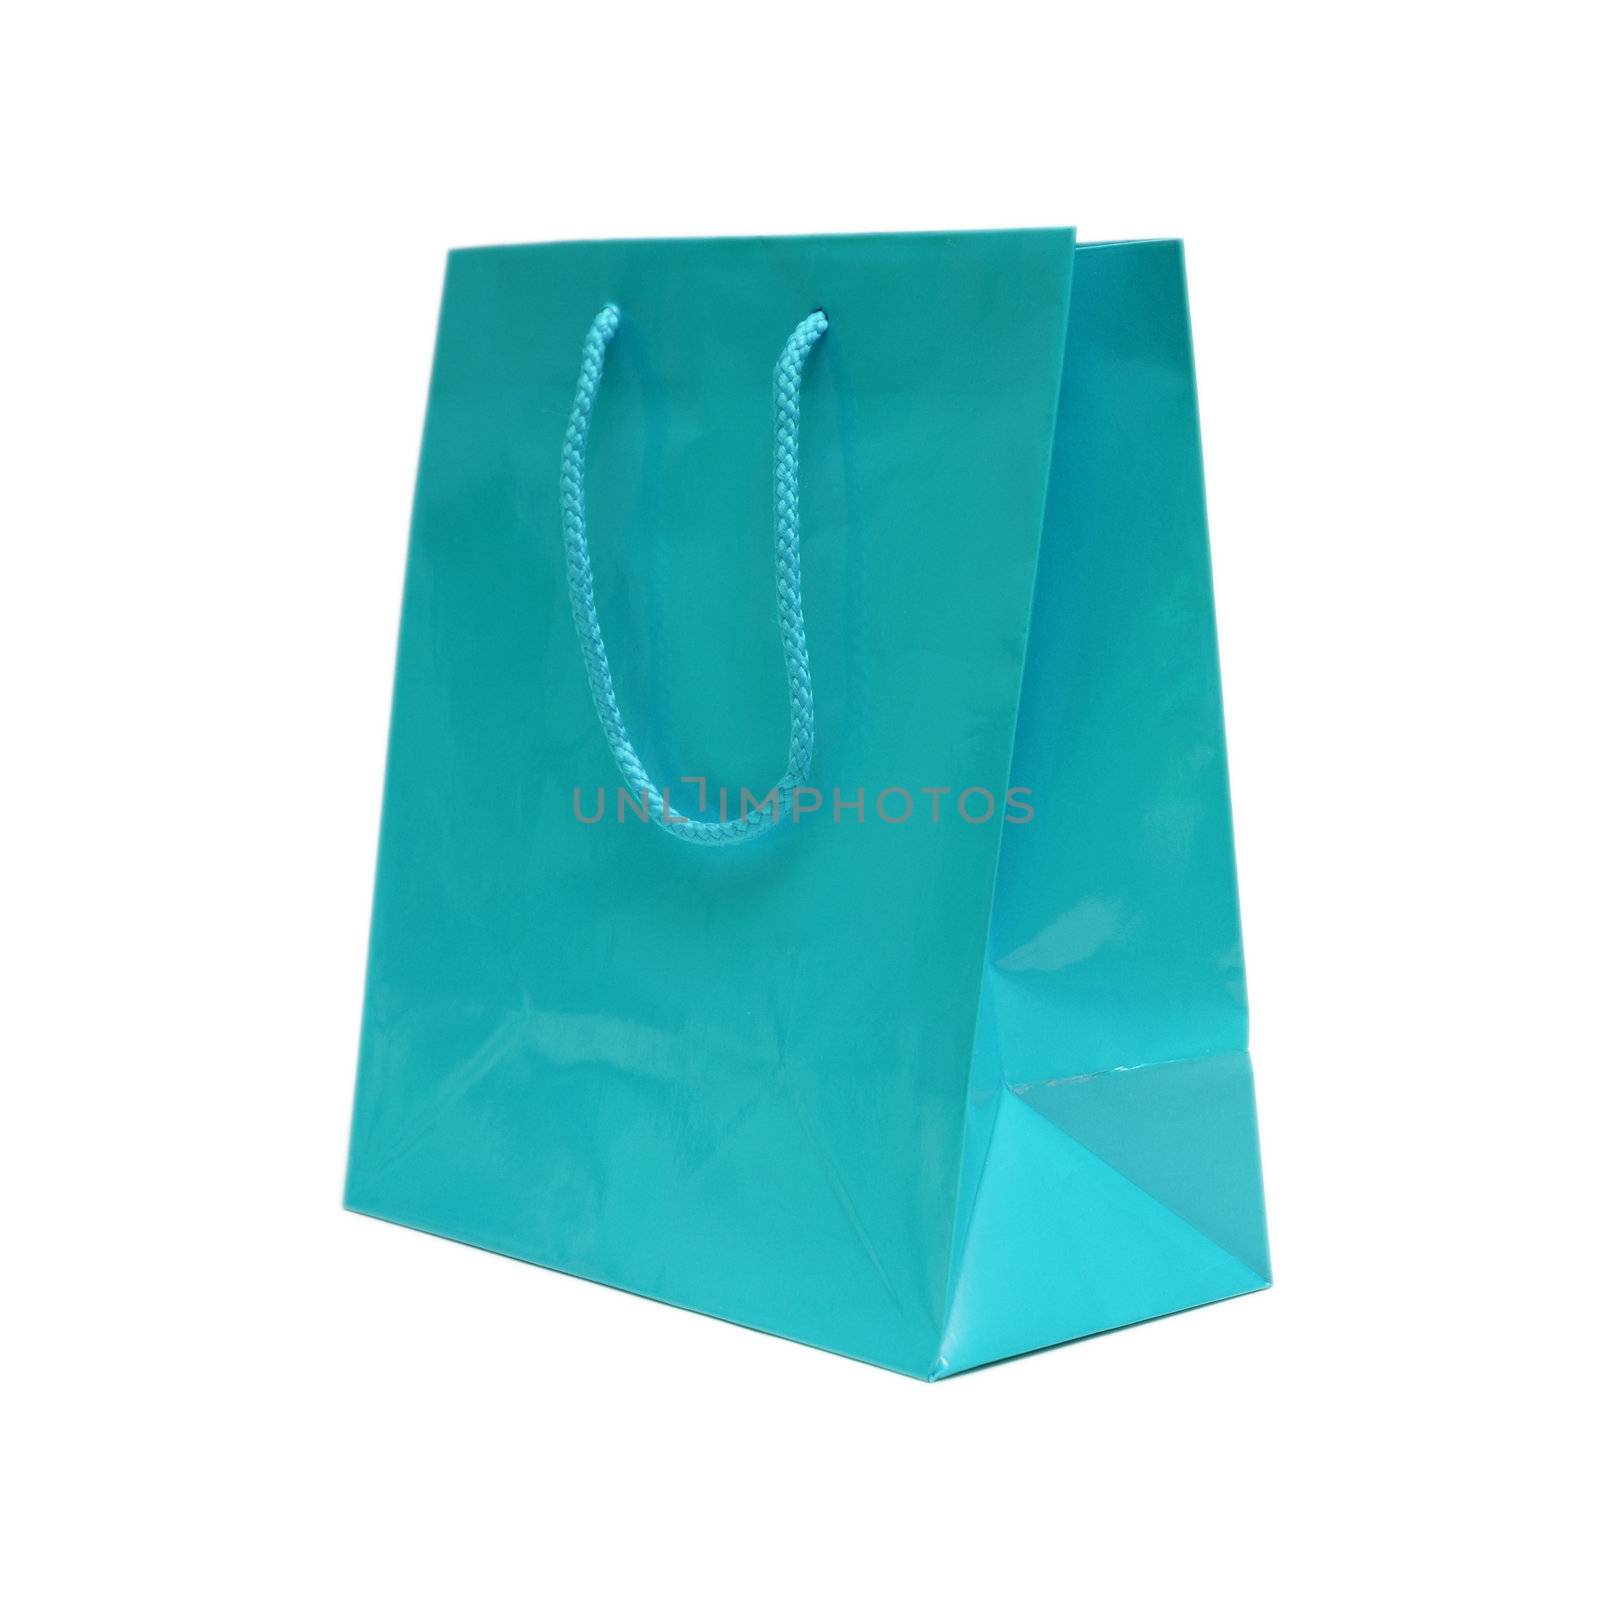 An isolated shot of a blue gift bag to put that special gift in.